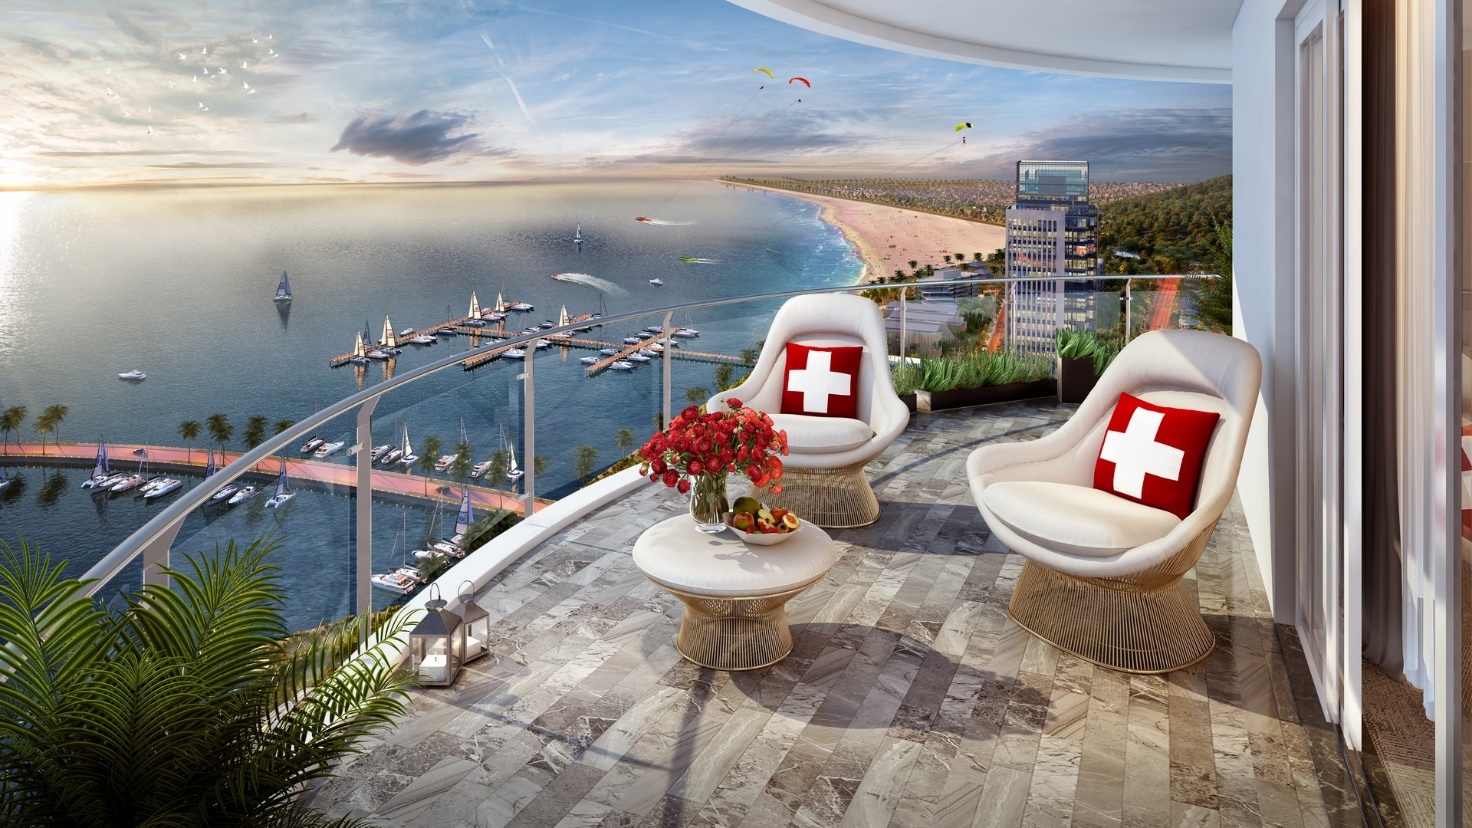 Swisstouches La Luna Resort will supply almost 2,000 five-star hotel rooms in Nha Trang.